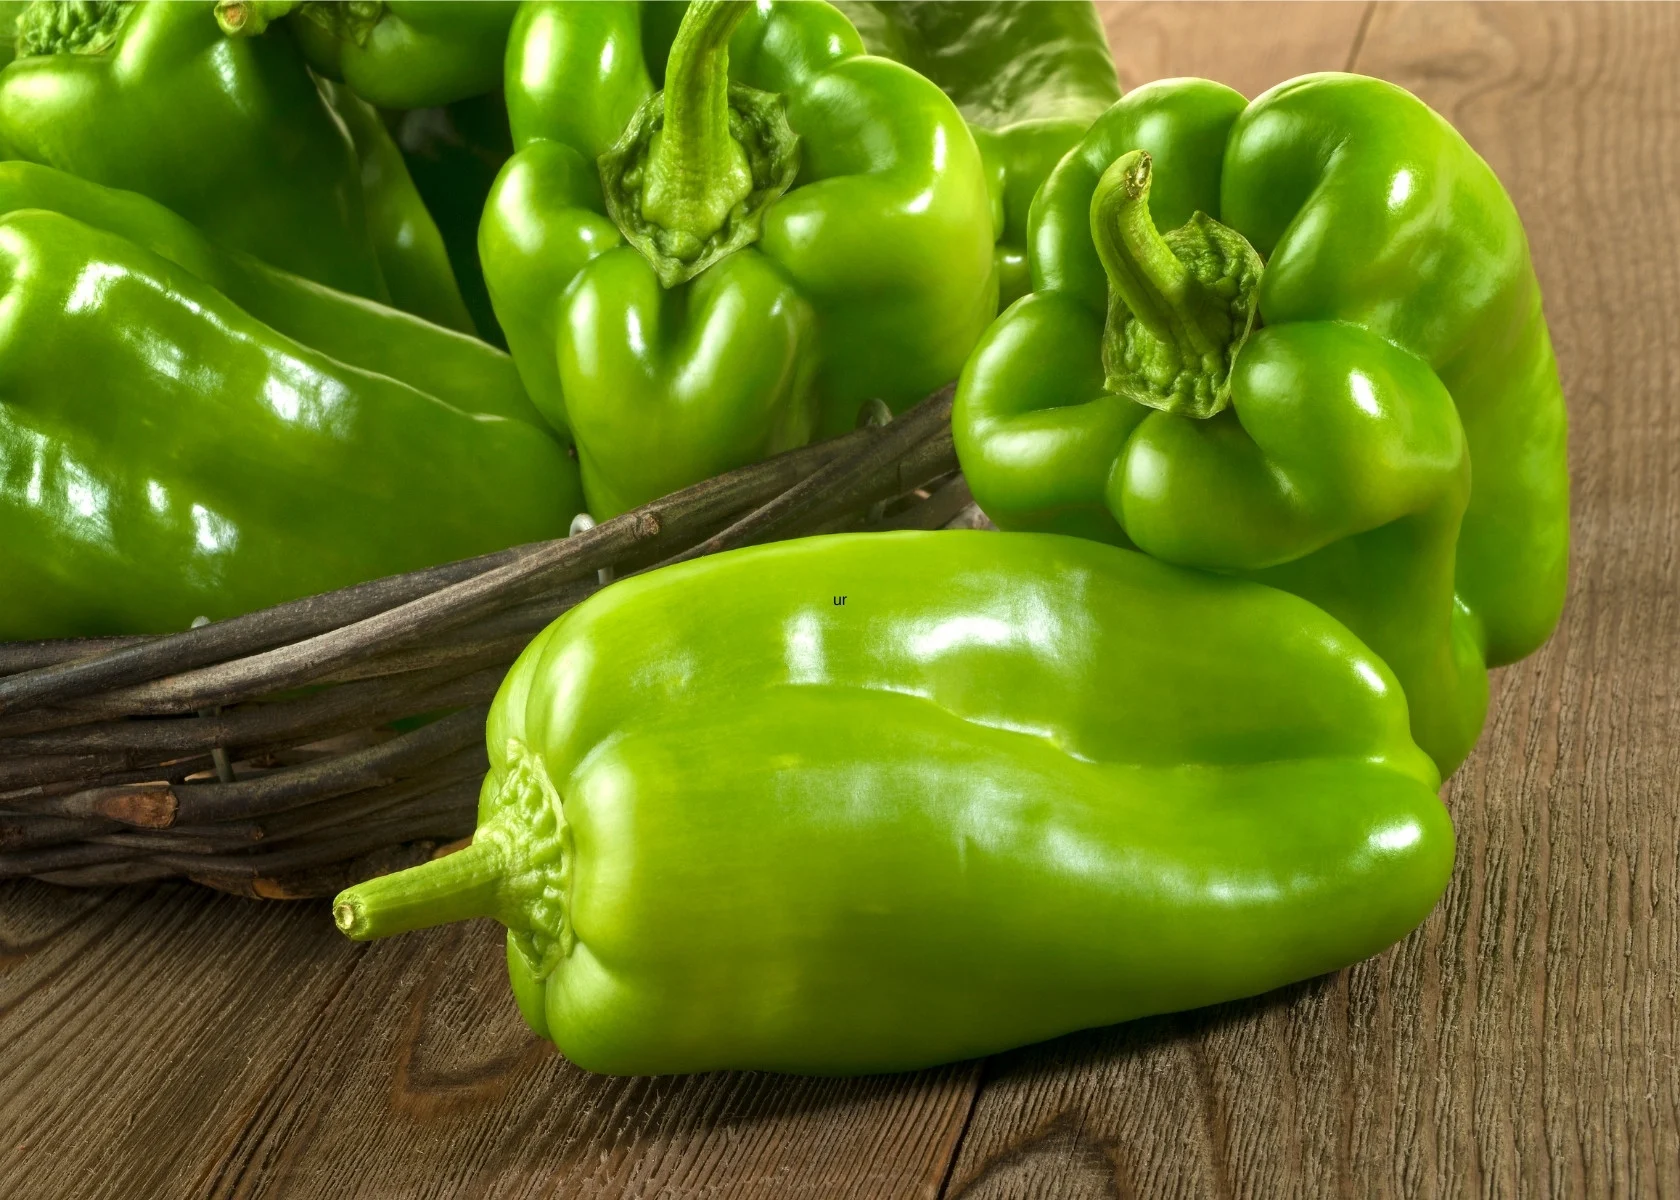 Several bright green bell peppers spilling from whicker basket onto wooden table.